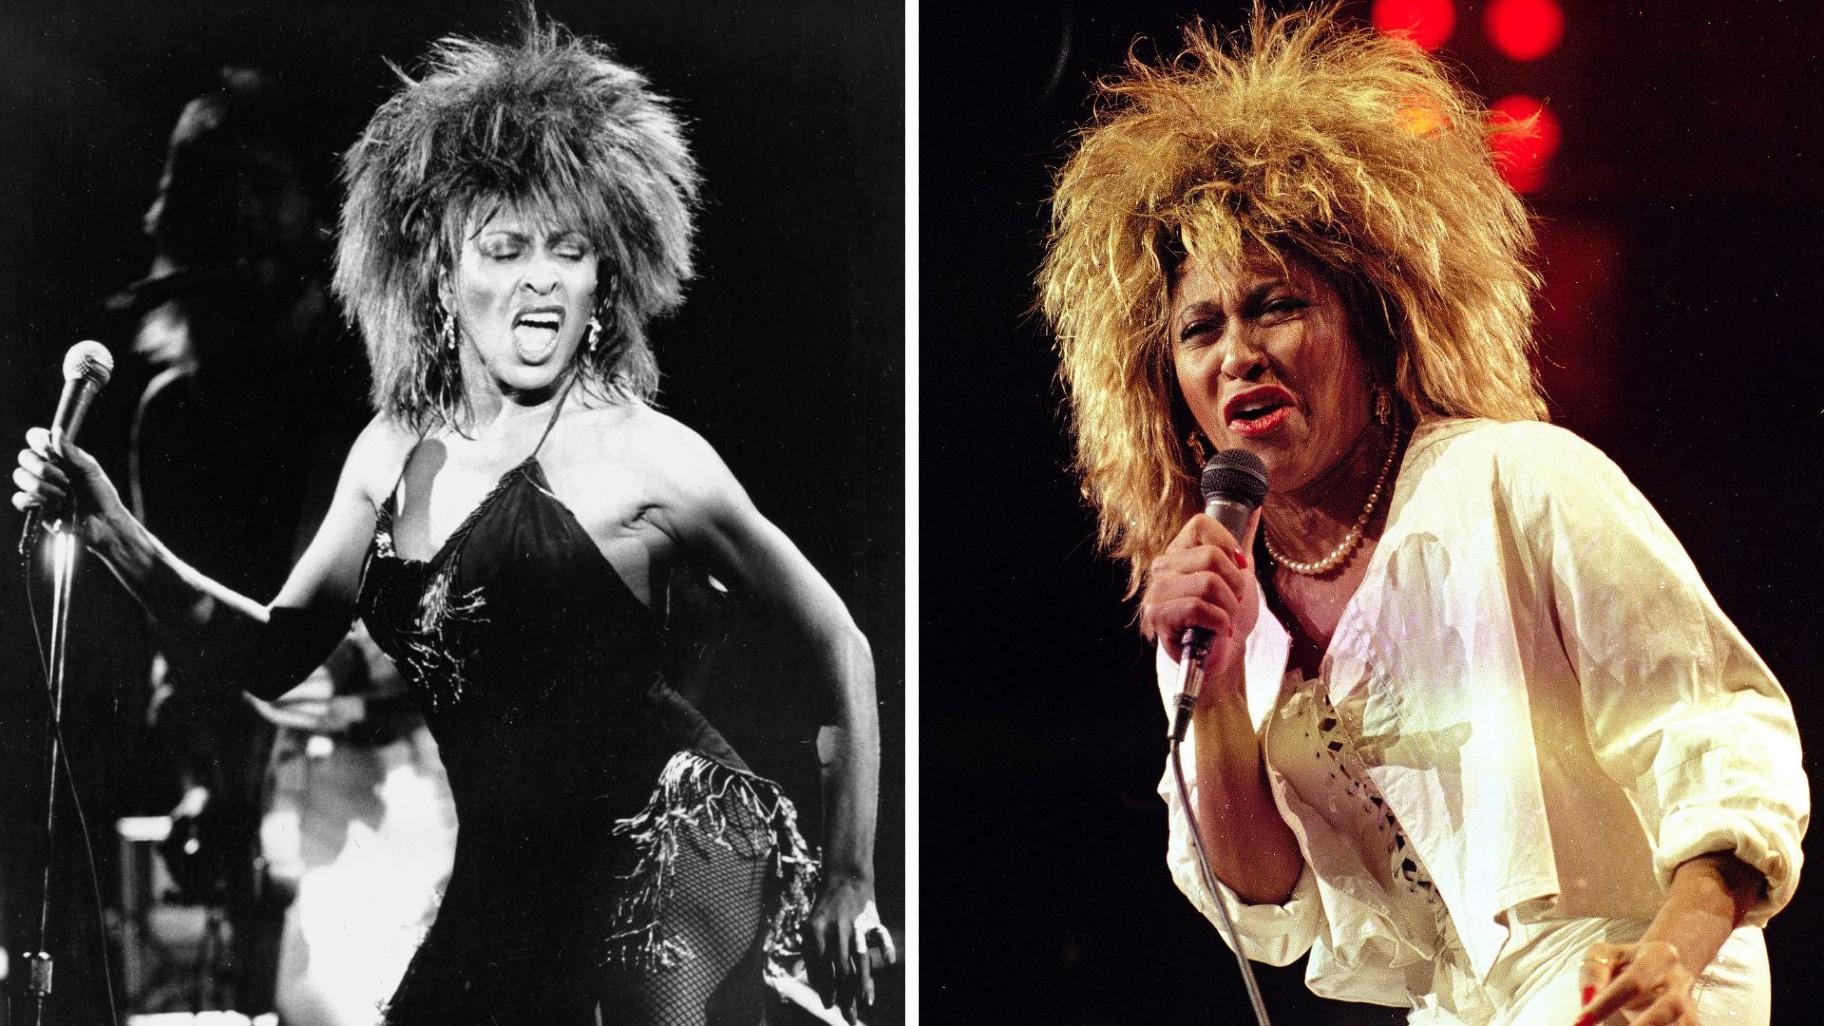 Left: FILE - Tina Turner performs her current hit song "What's Love Got to Do With It" in Los Angeles on Sept. 2, 1984. (AP Photo / Phil Ramey, File) Right: FILE - Tina Turner performs at New York's Madison Square Garden on Aug. 1, 1985. (AP Photo / Ray Stubblebine, File)